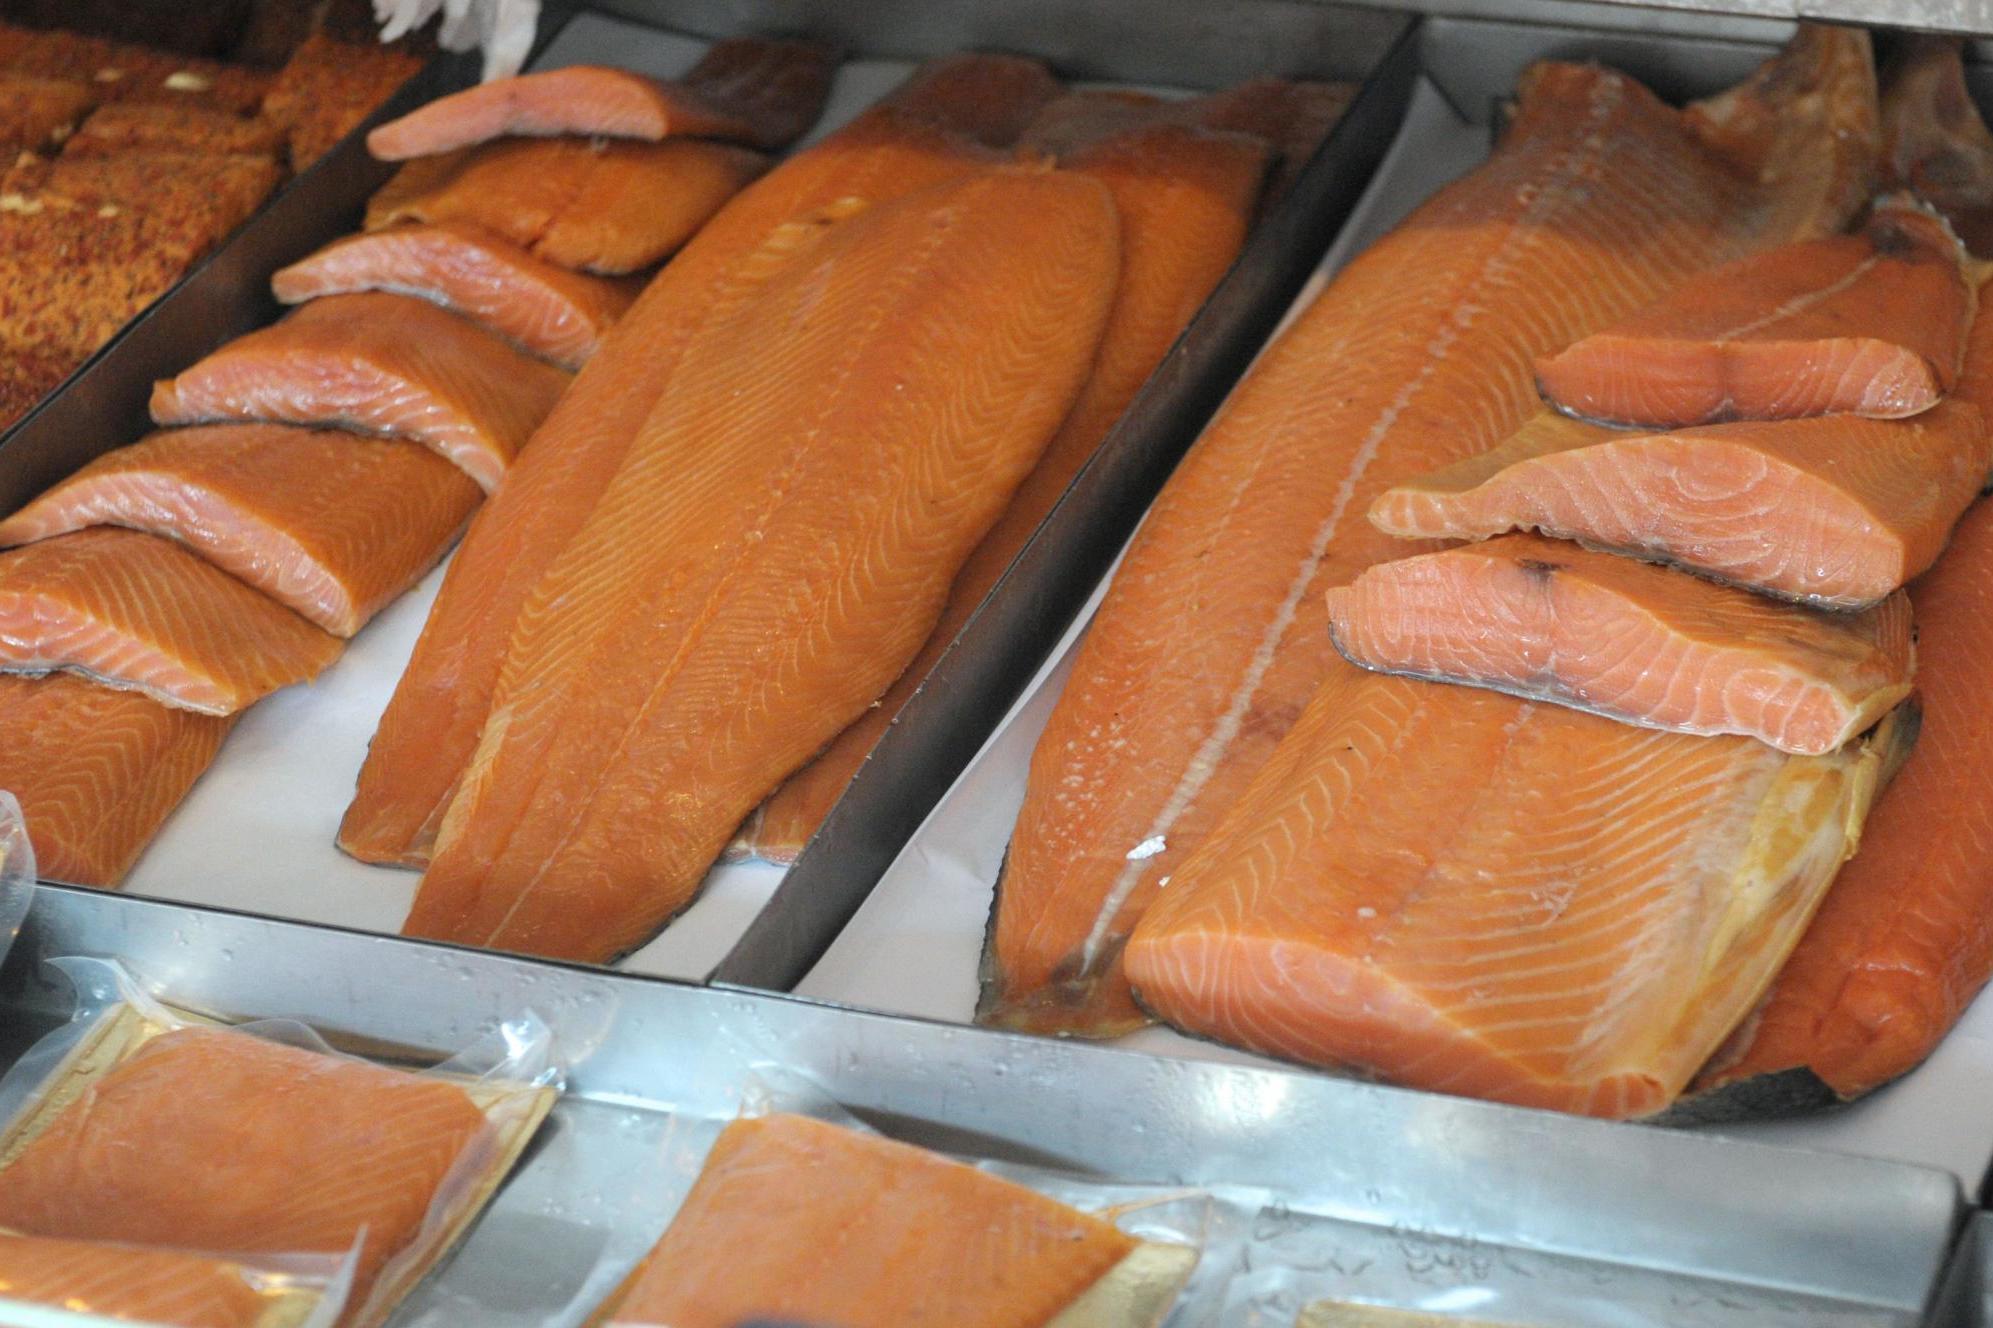 Salmon and rainbow trout fillets look very similar